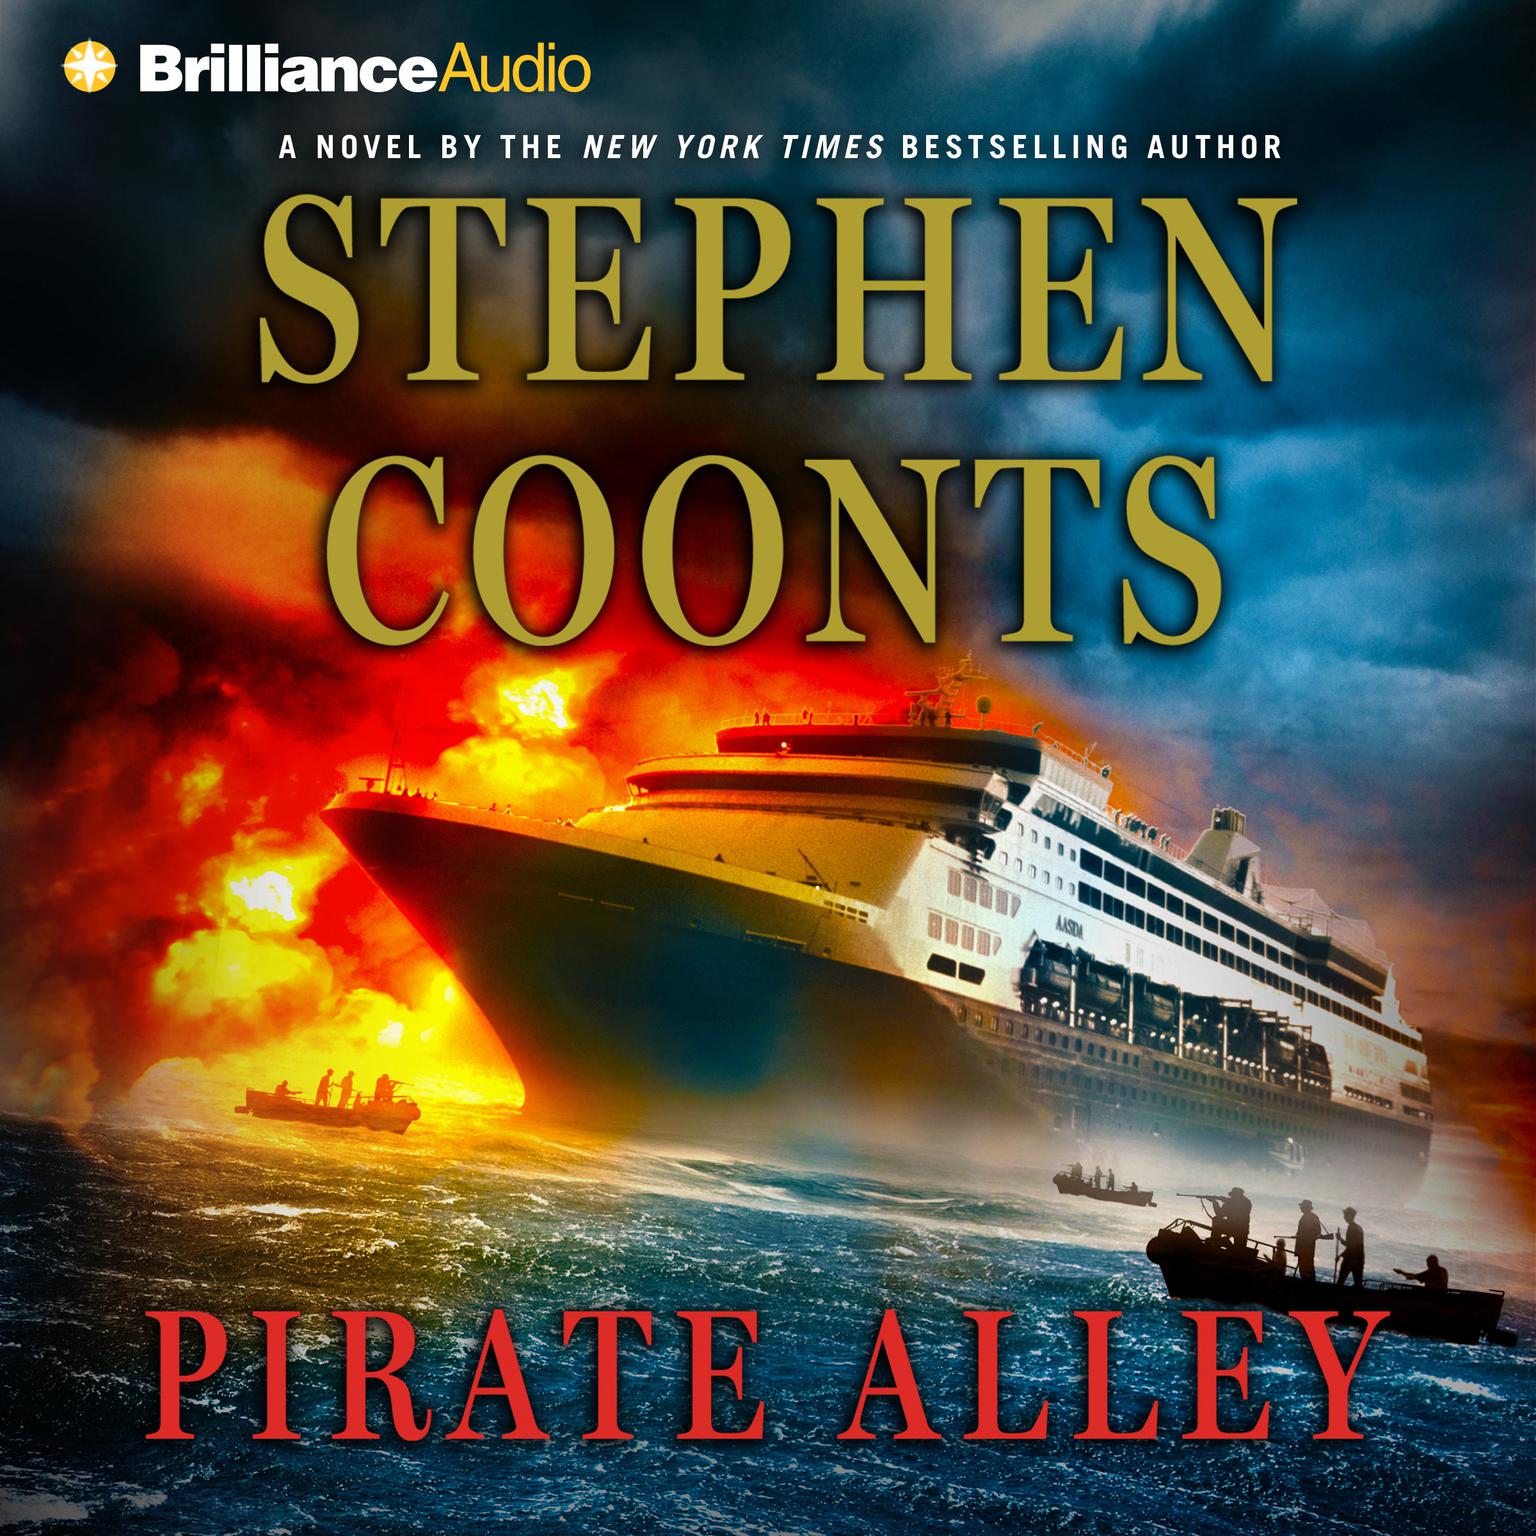 Pirate Alley (Abridged) Audiobook, by Stephen Coonts